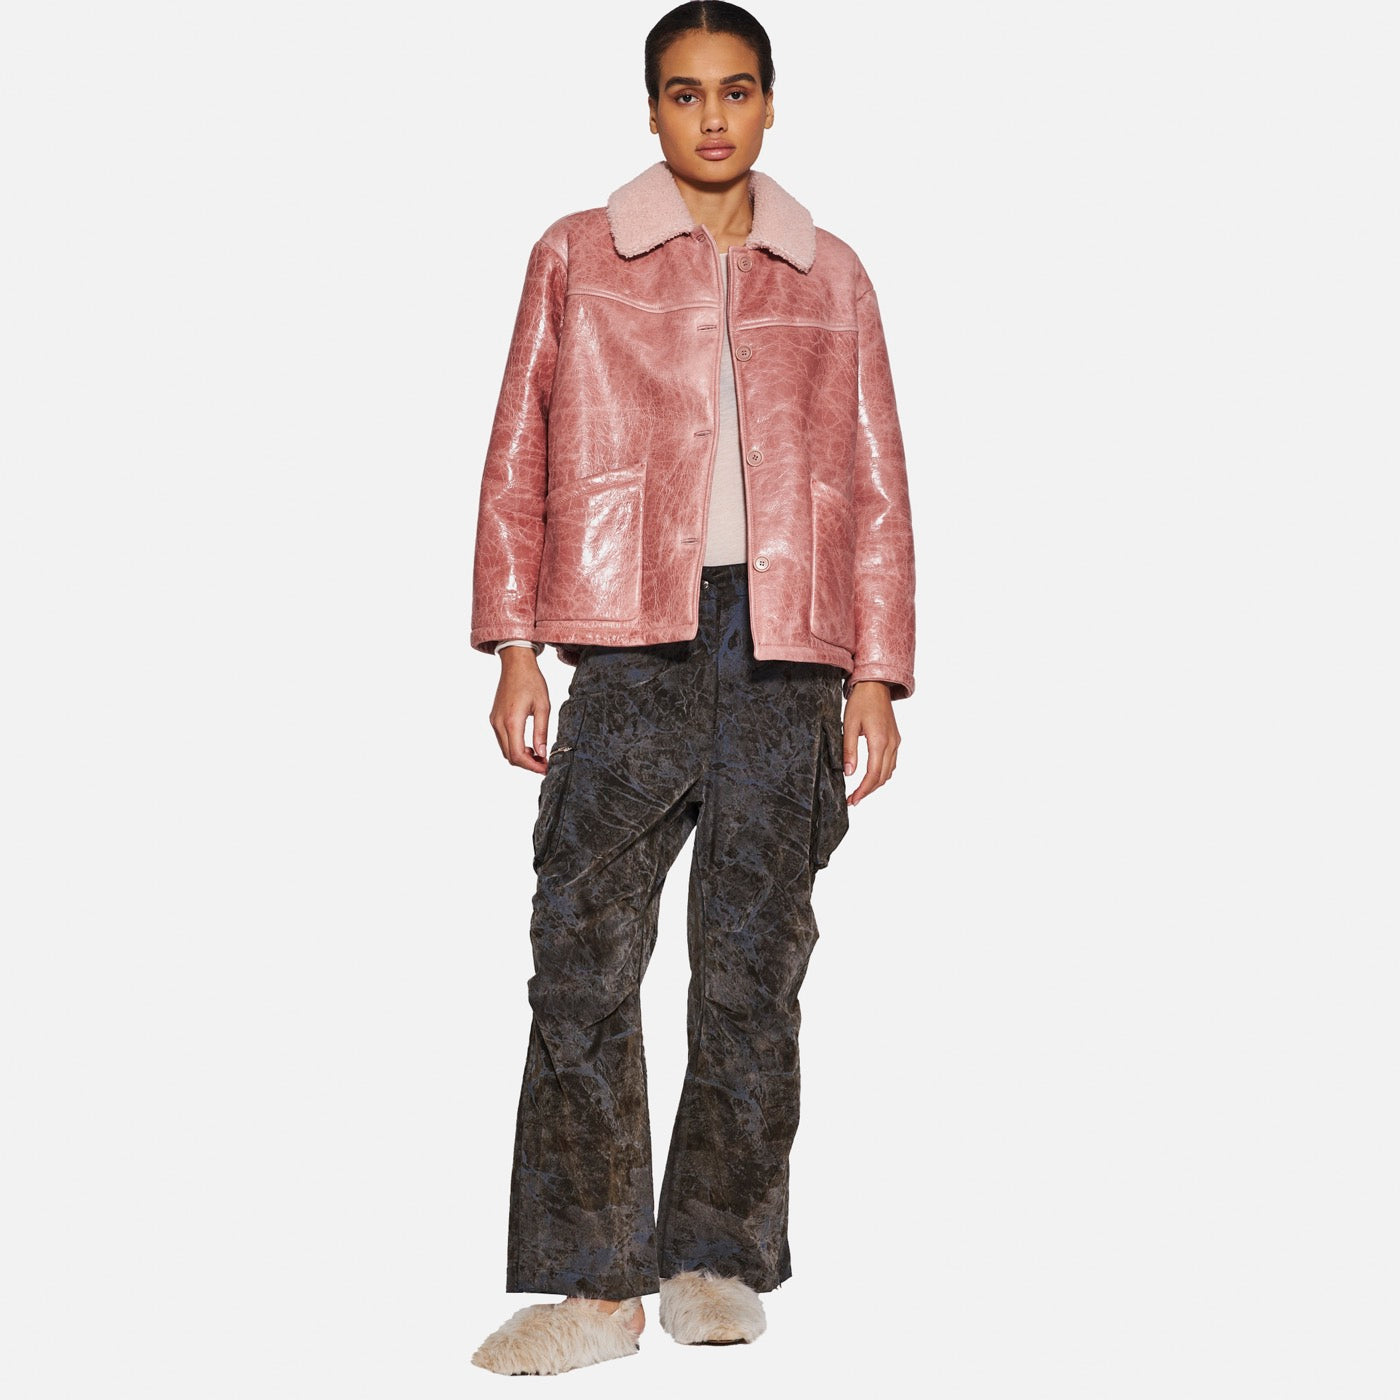 GIACCA IN SHEARLING - ROSA